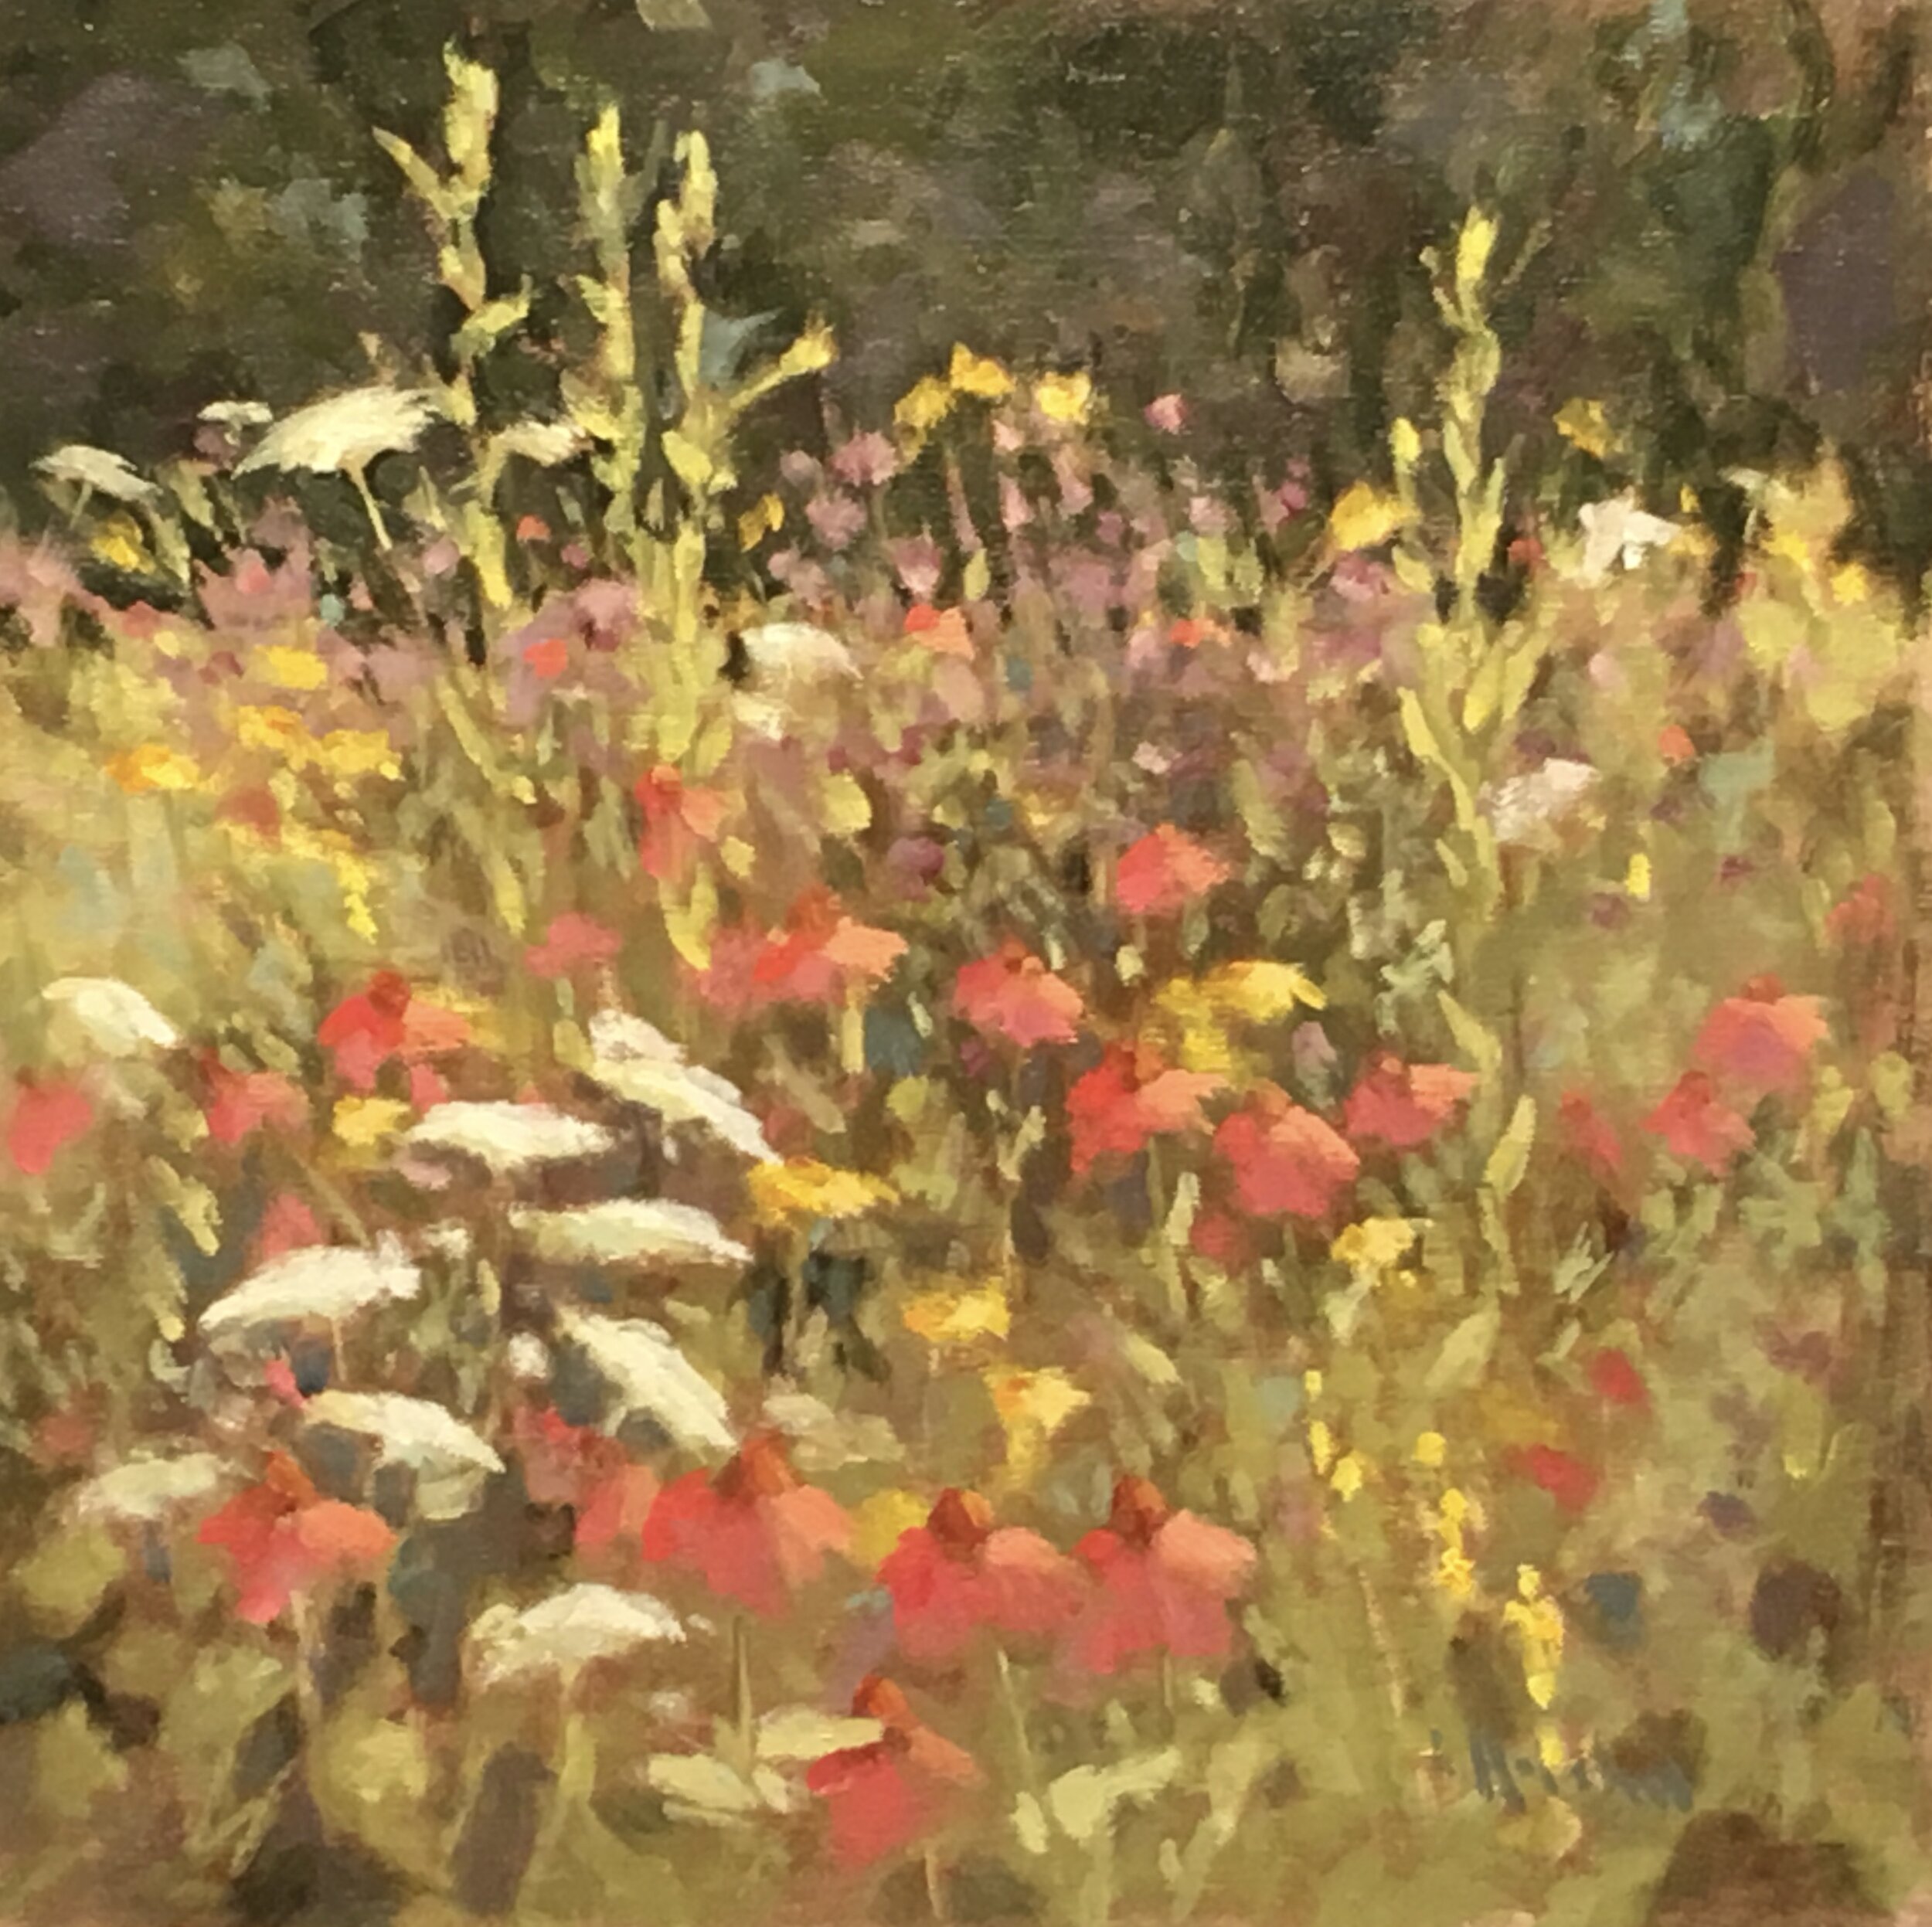 A Chaos of Flowers, oil on linen, 12 x 12, sold